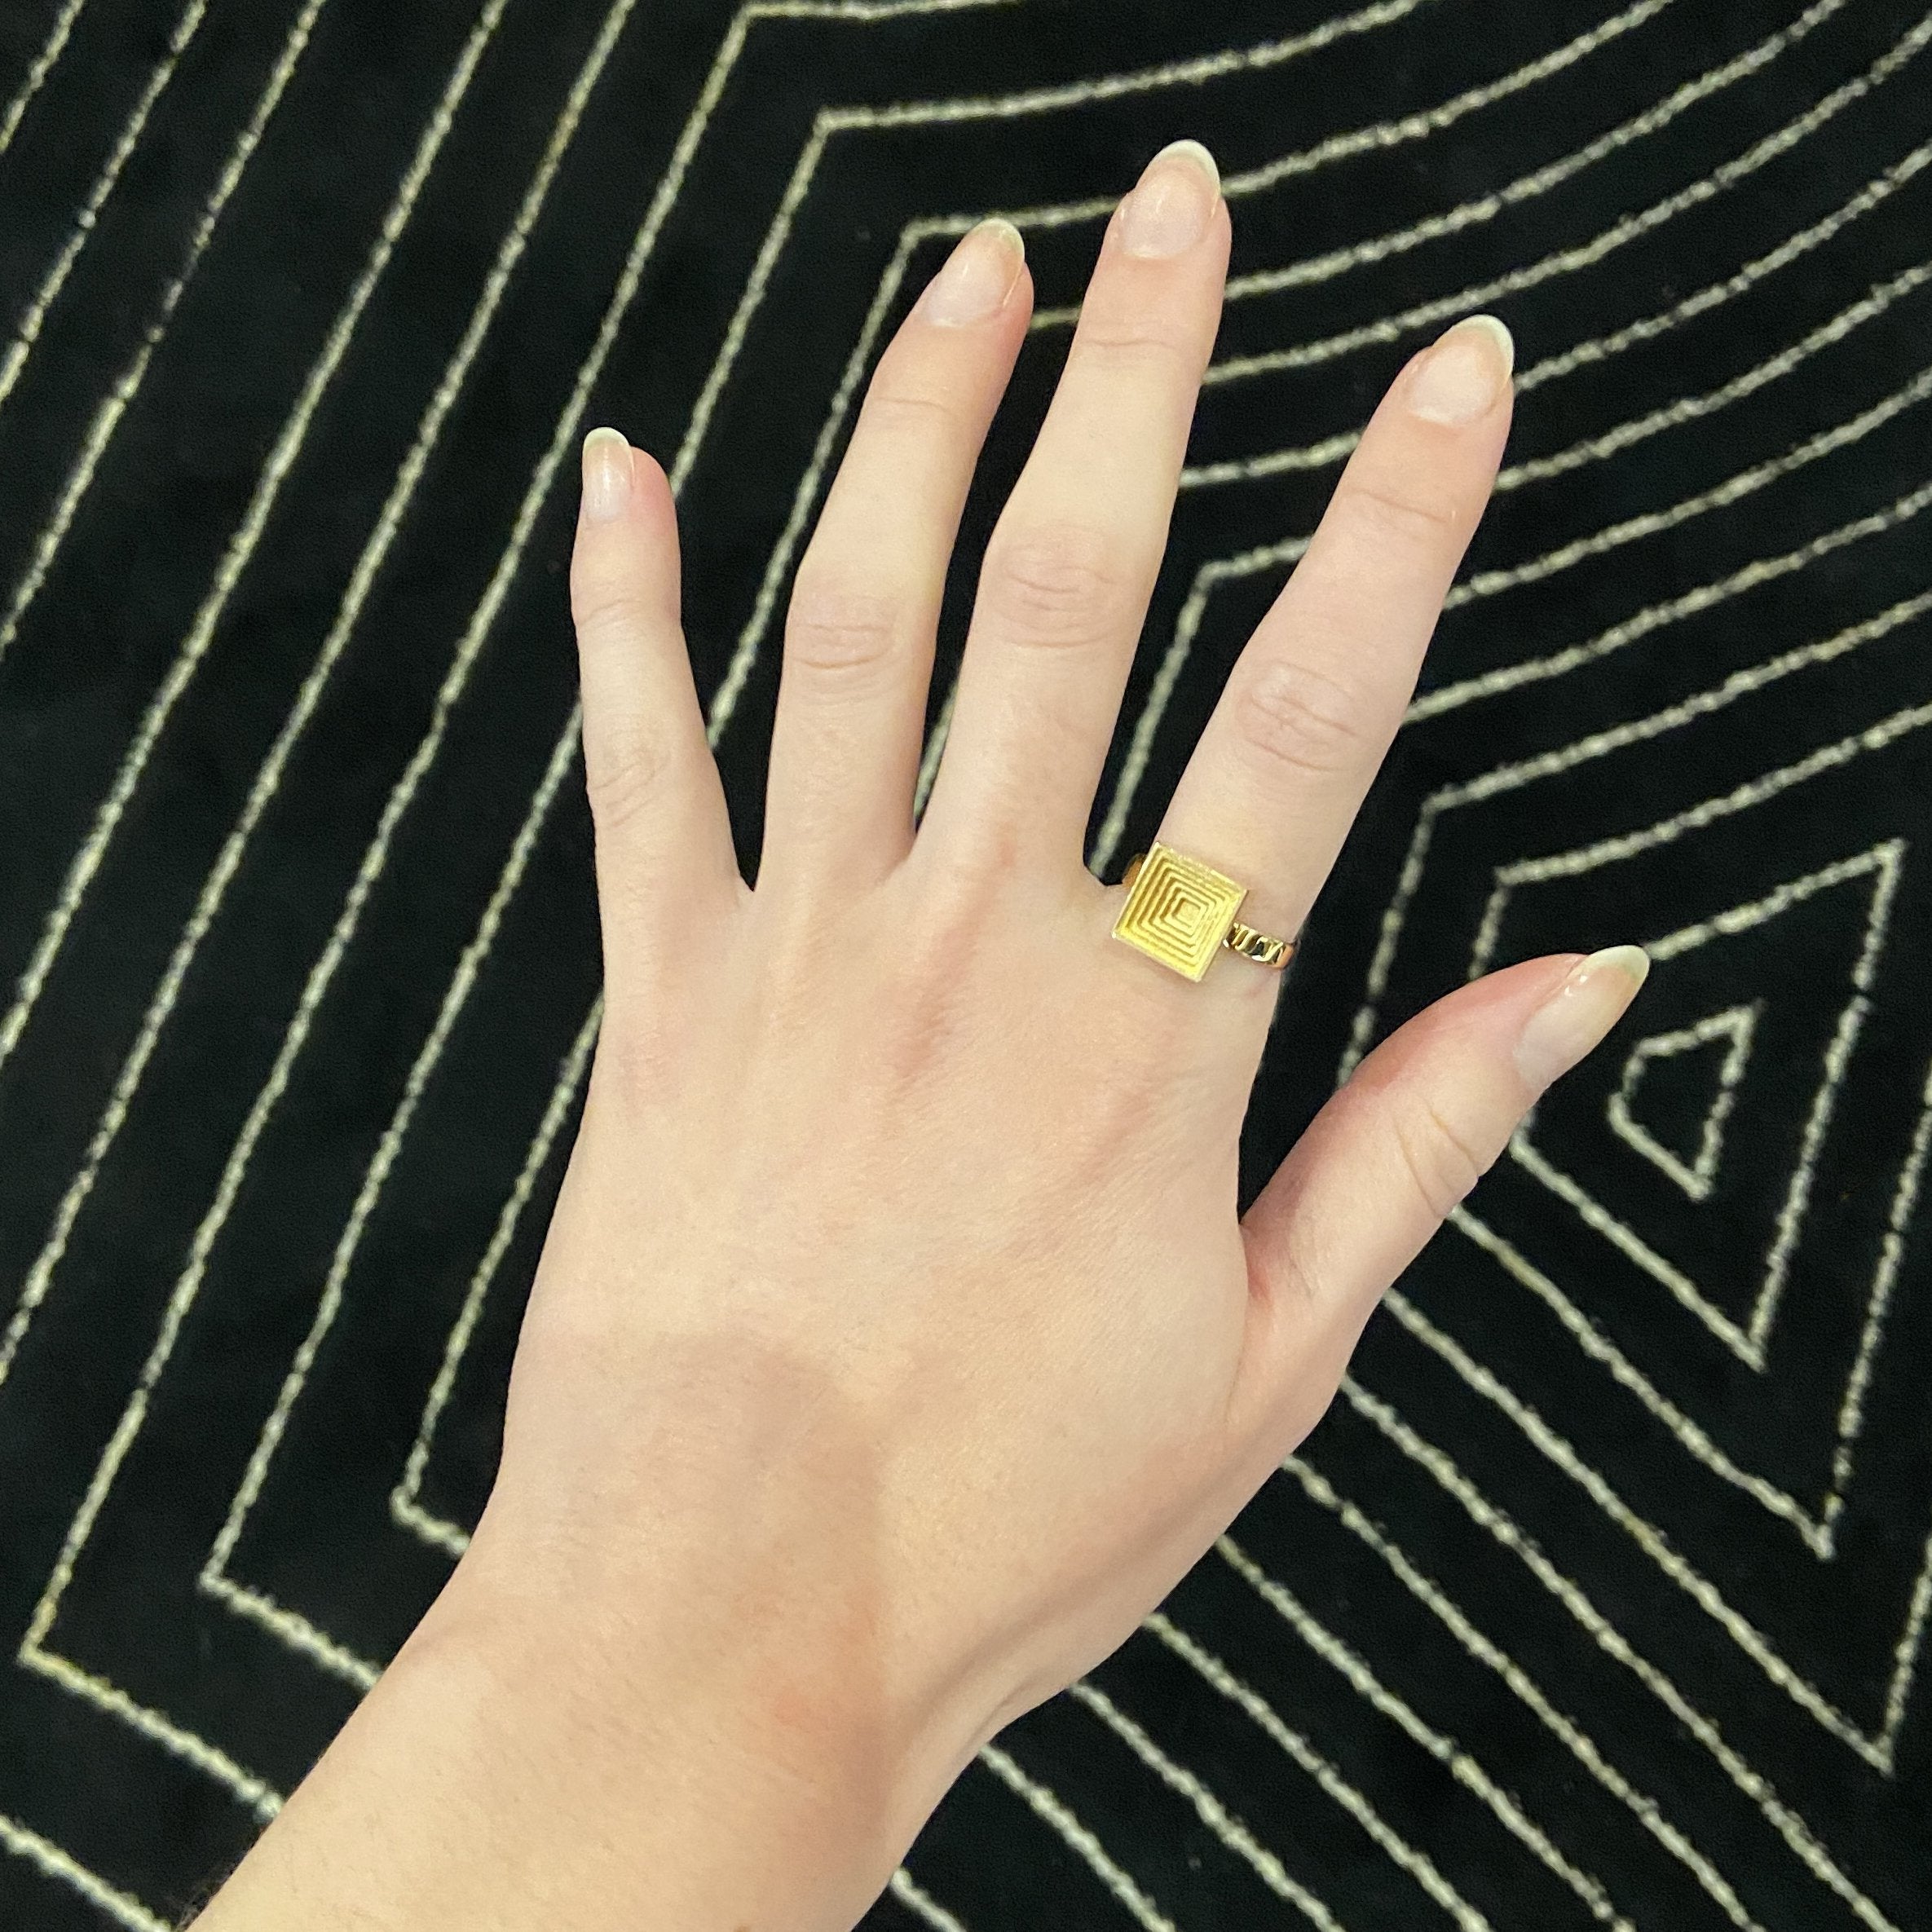 24:7 Square embossed Geometric Spinner Ring in 18 Karat Yellow Gold by Solange Azagury-Partridge on hand